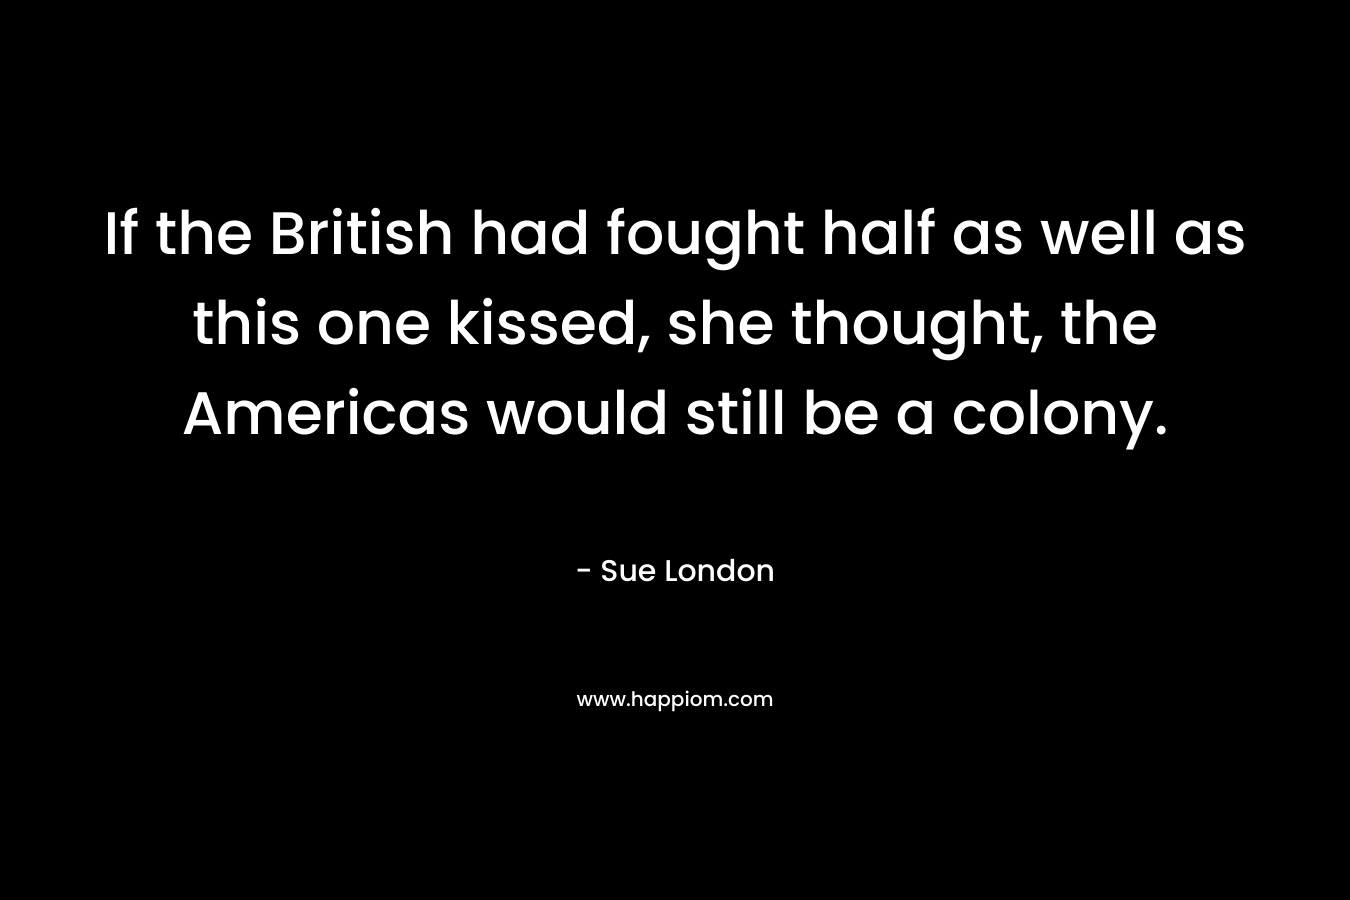 If the British had fought half as well as this one kissed, she thought, the Americas would still be a colony.